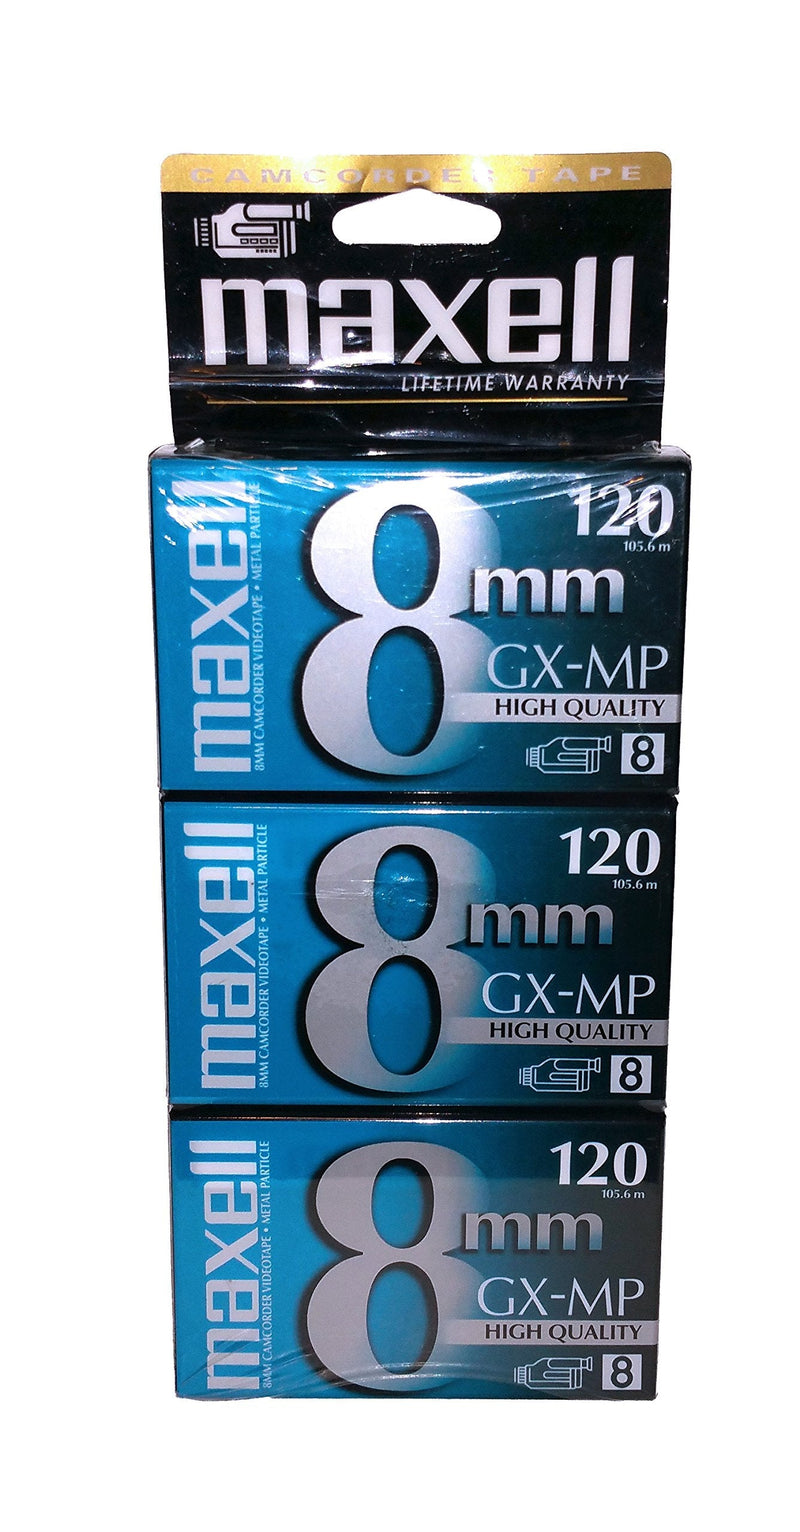 Maxell GX-MP 120 Camcorder Tapes, 3 Pack